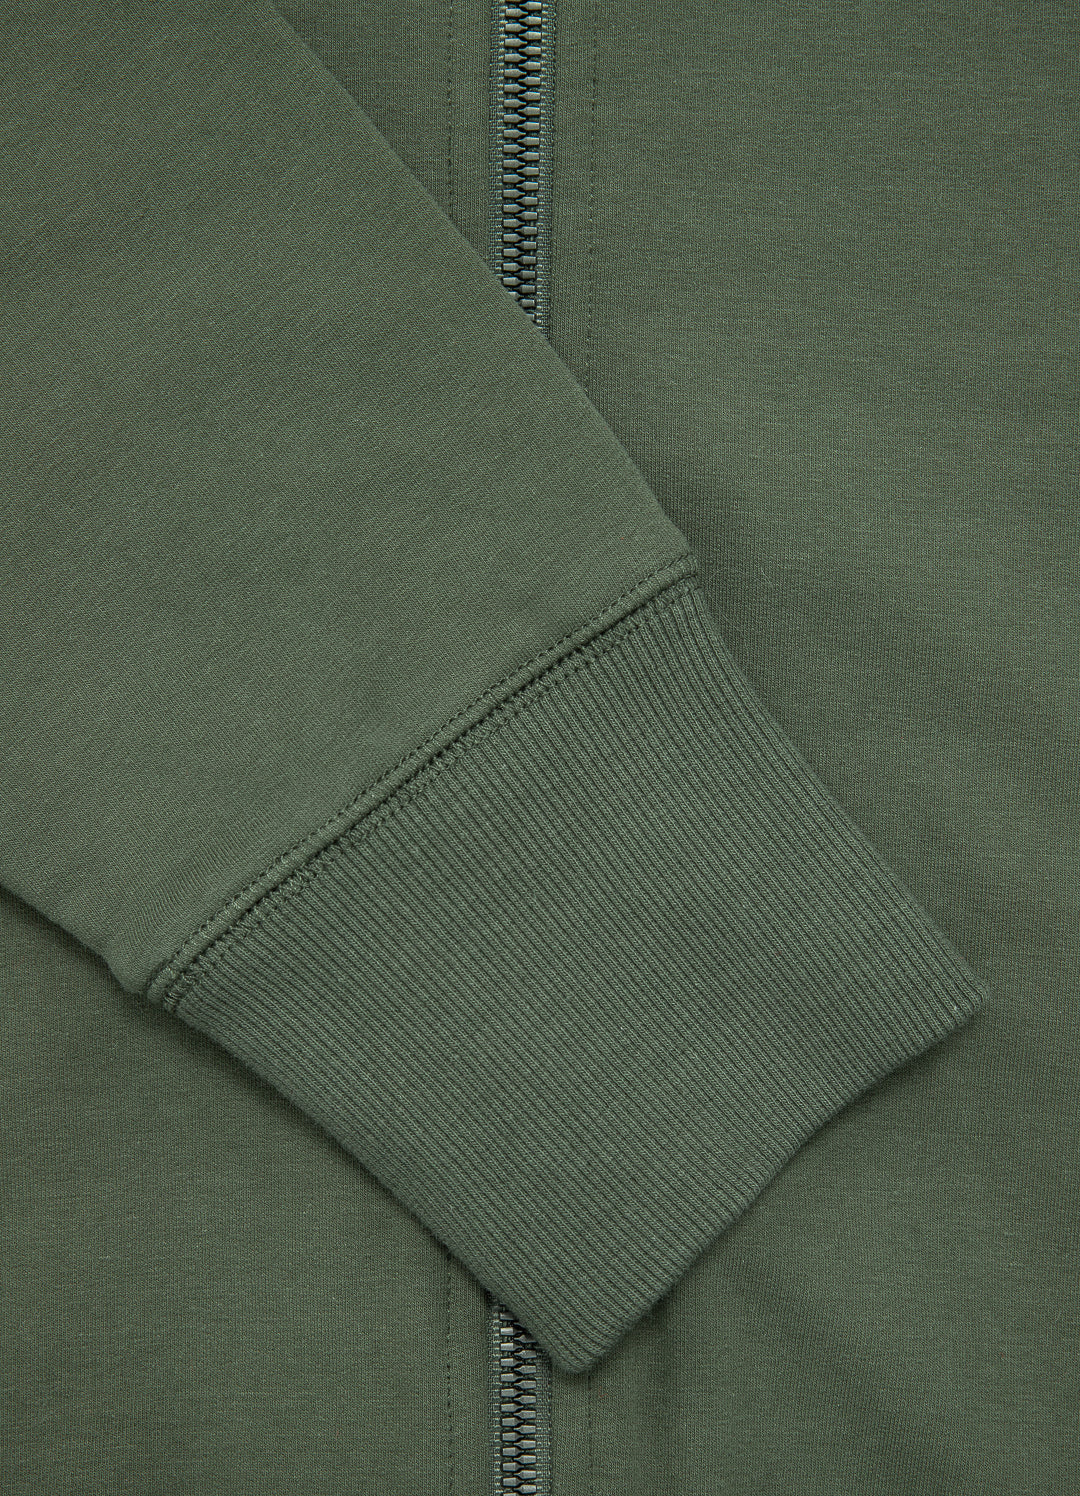 VETTER French Terry Olive Sweatjacket.